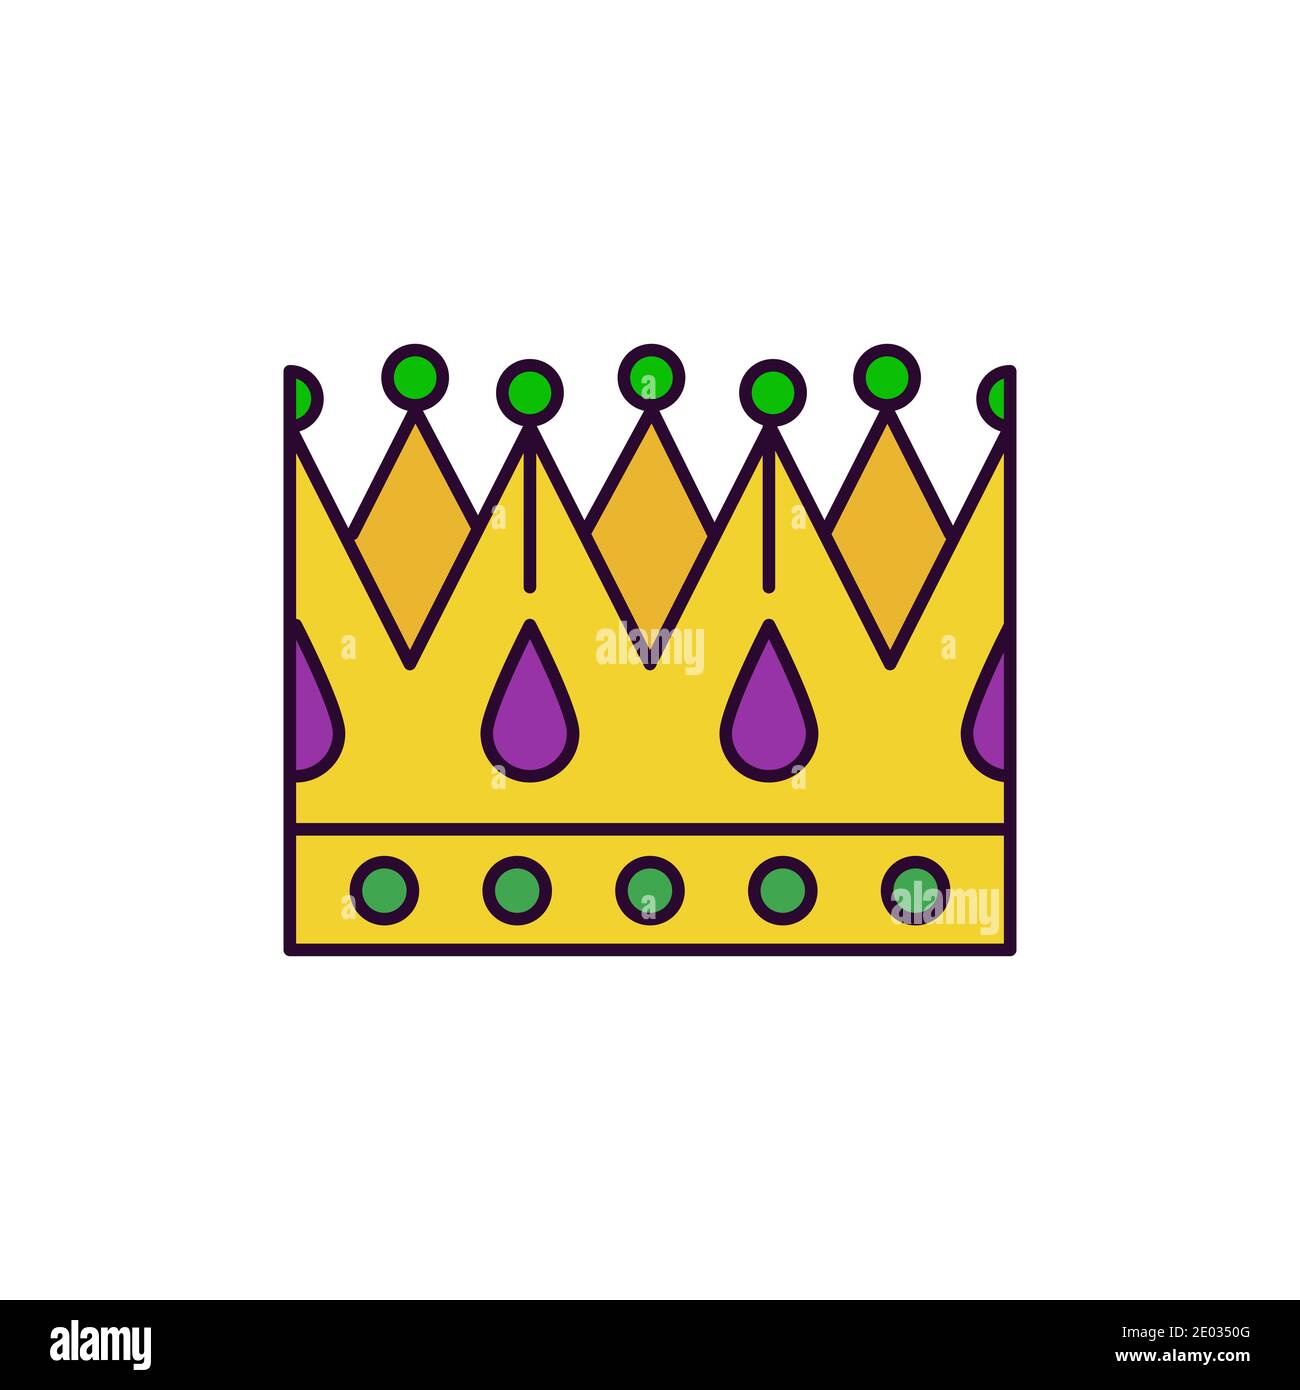 Web icon of paper king crown with gems in traditional purple-green-yellow palette. Symbol of of theater, masquerade party, Mardi Gras or Fat Tuesday Stock Vector